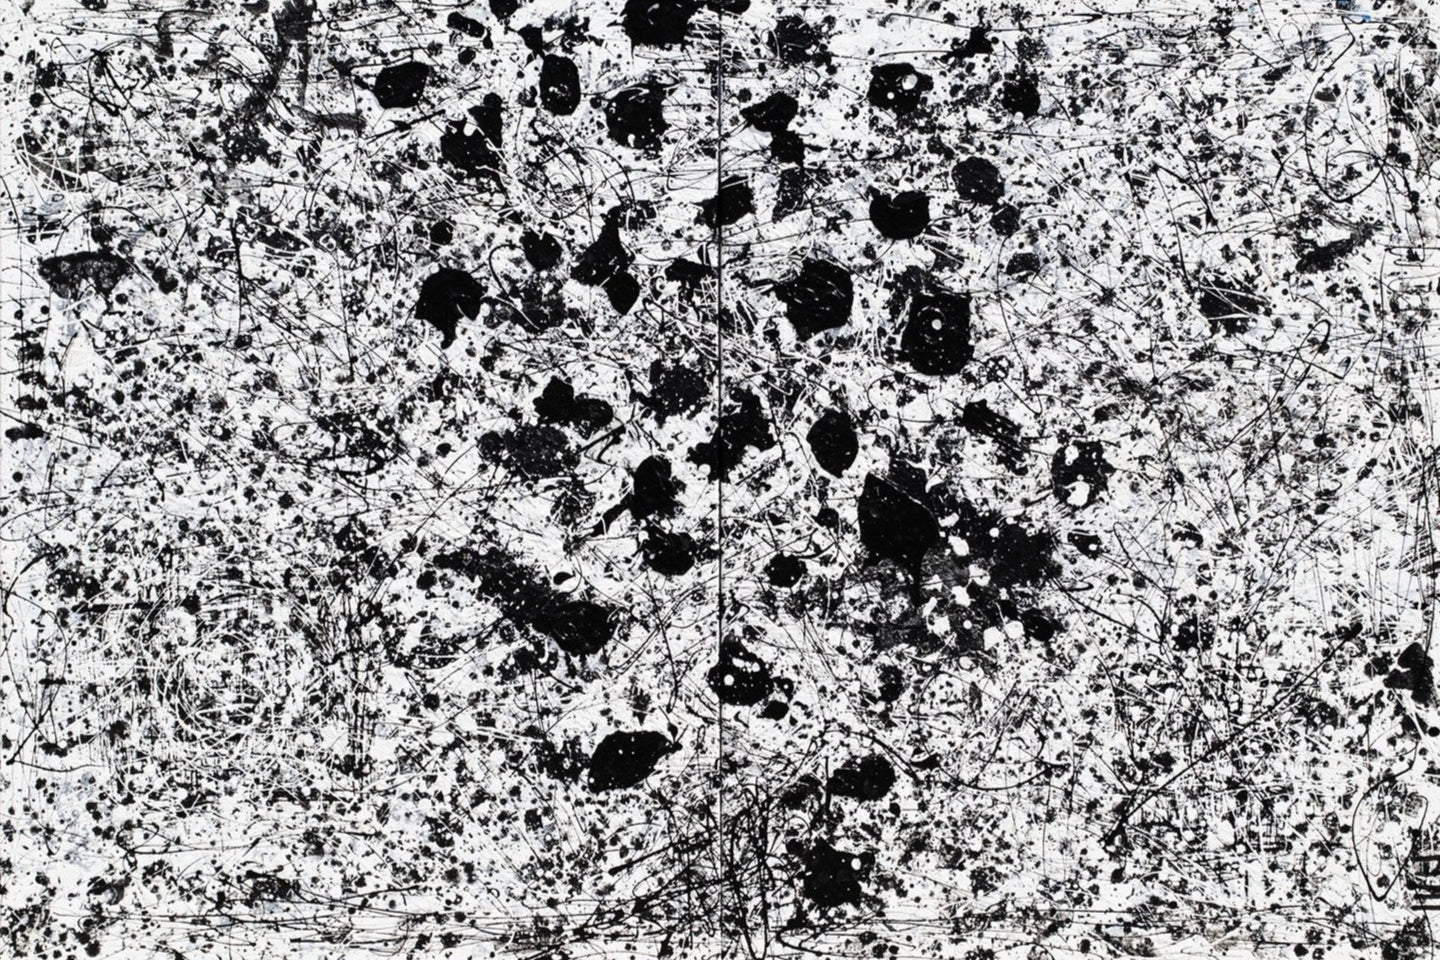 J. Steven Manolis, Black and White MLMJ, 2016, Acrylic on canvas, 48 x 72 inches, Large Black and White Wall Art, Abstract expressionism art for sale at Manolis Projects Art Gallery, Miami, Fl